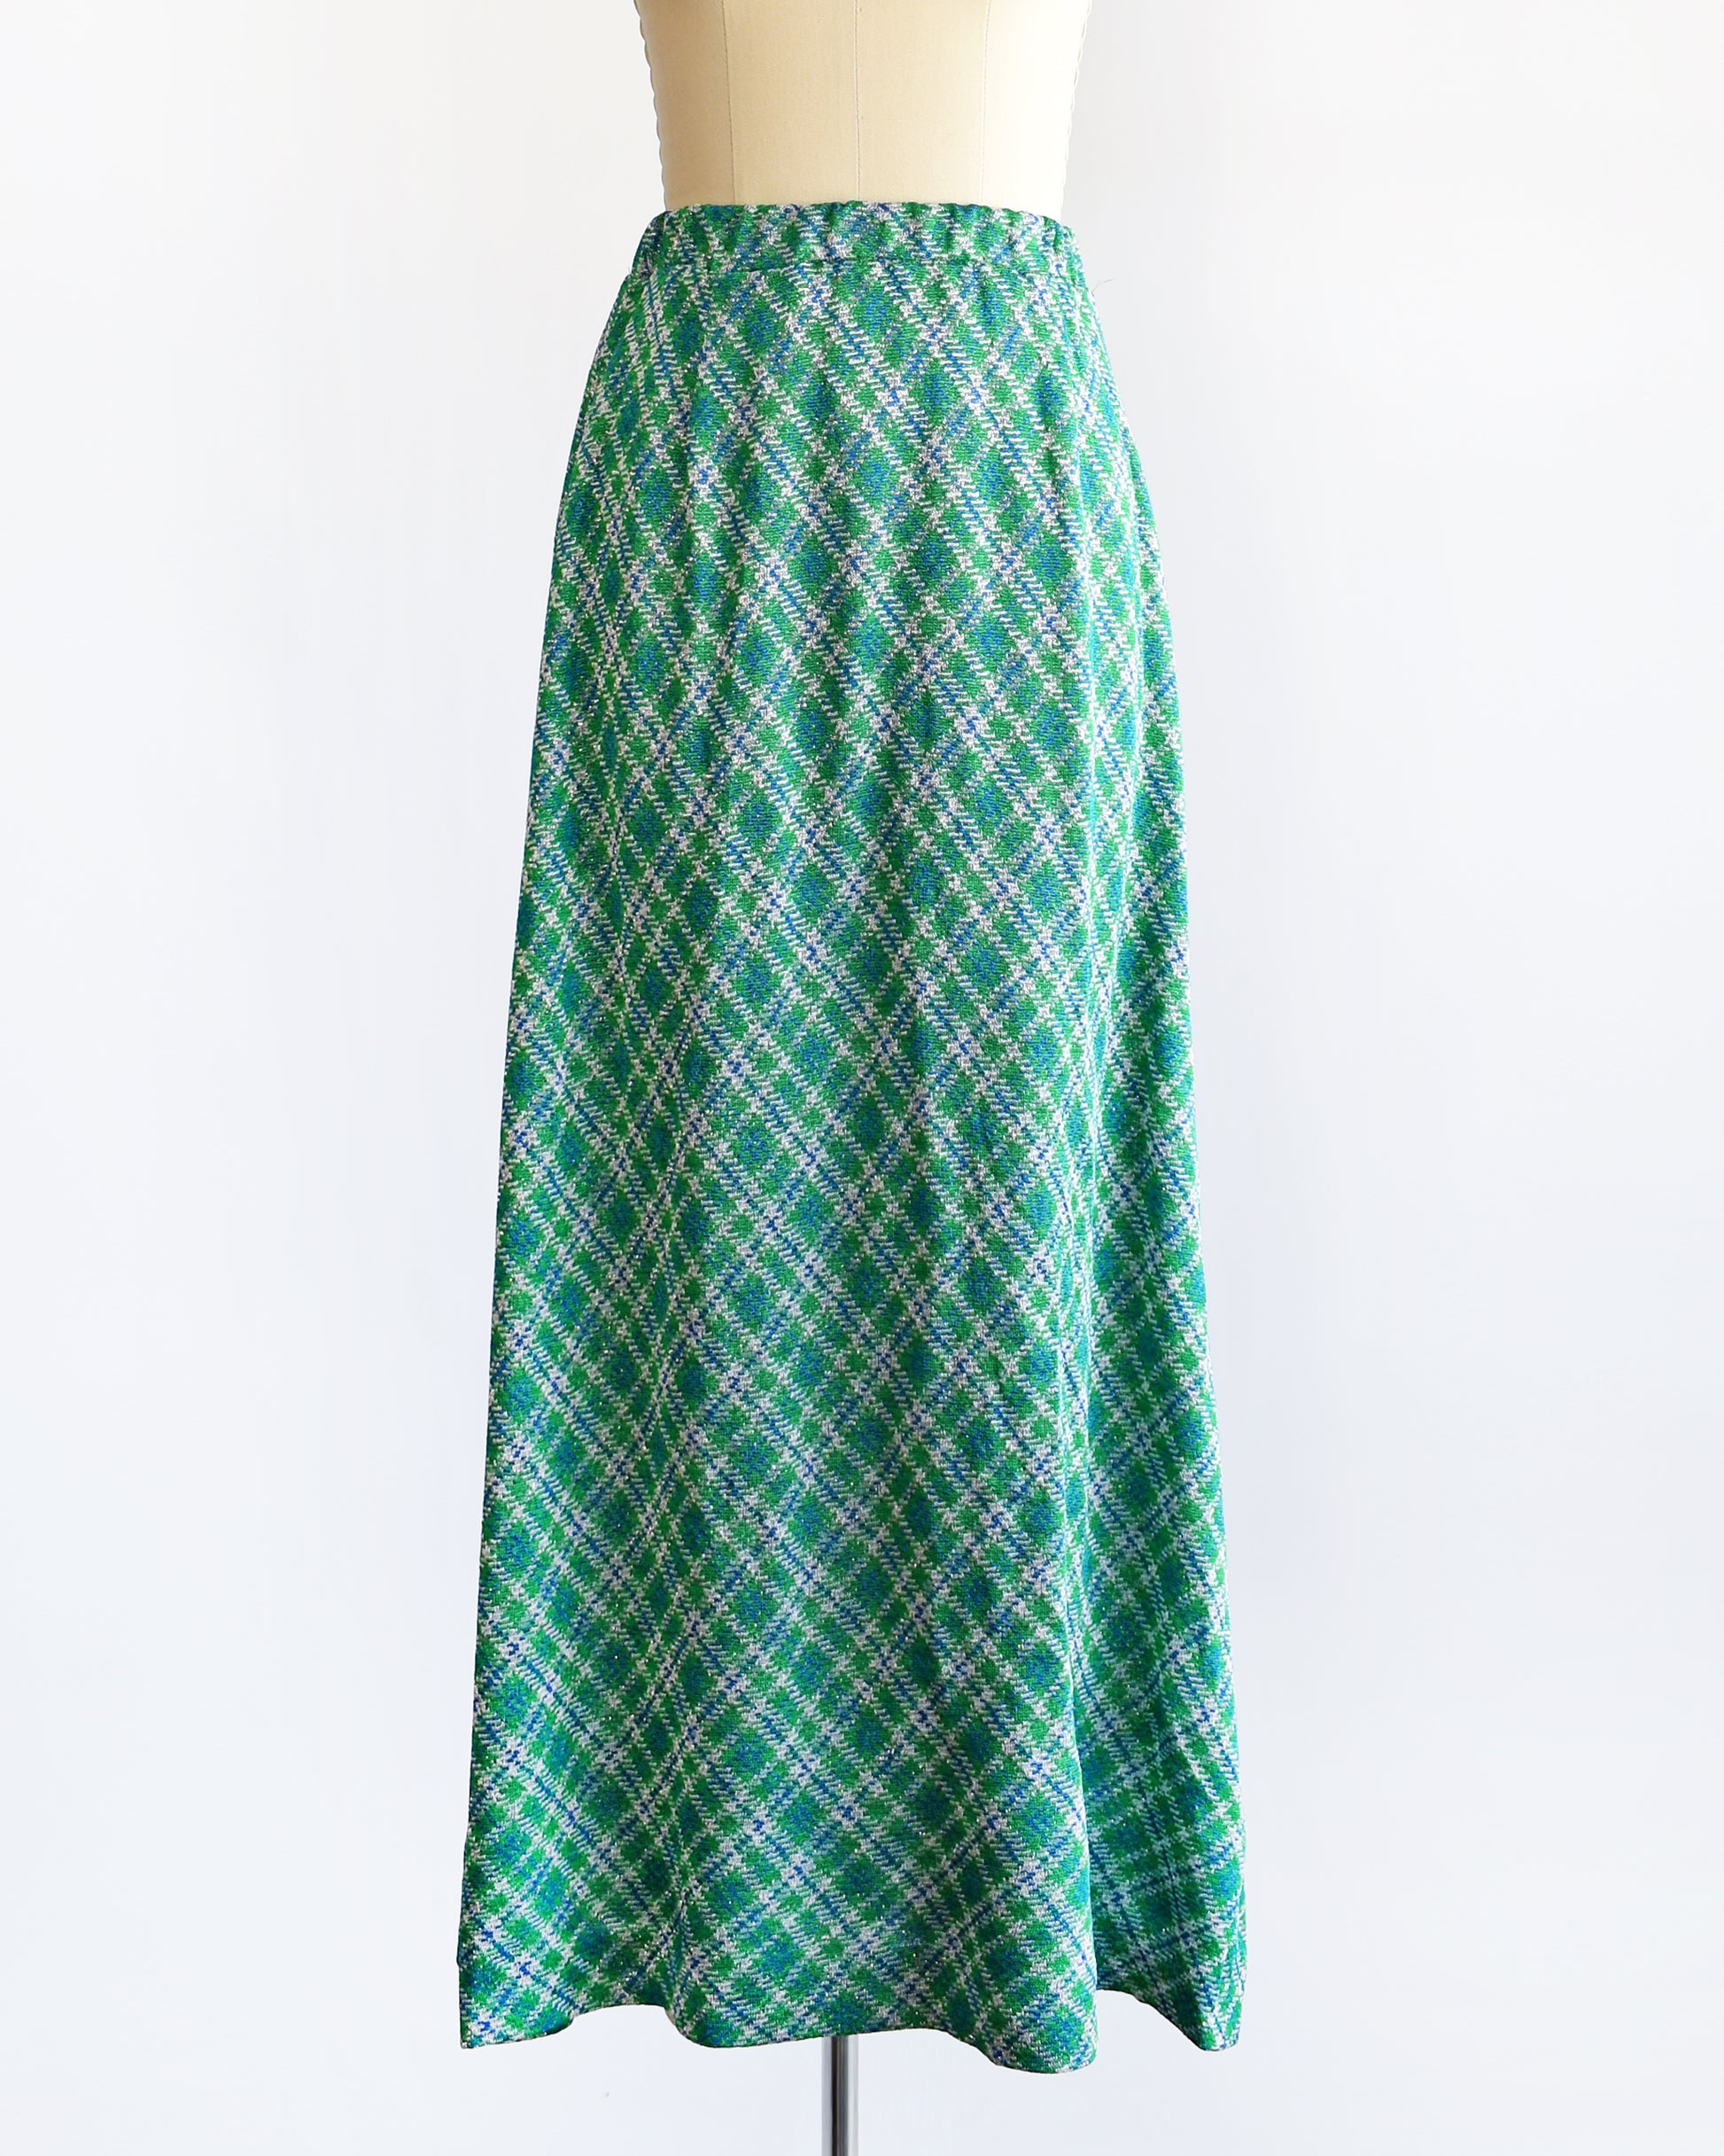 A vintage 1970s maxi skirt that features festive green, blue, and white plaid fabric with silver metallic threads.